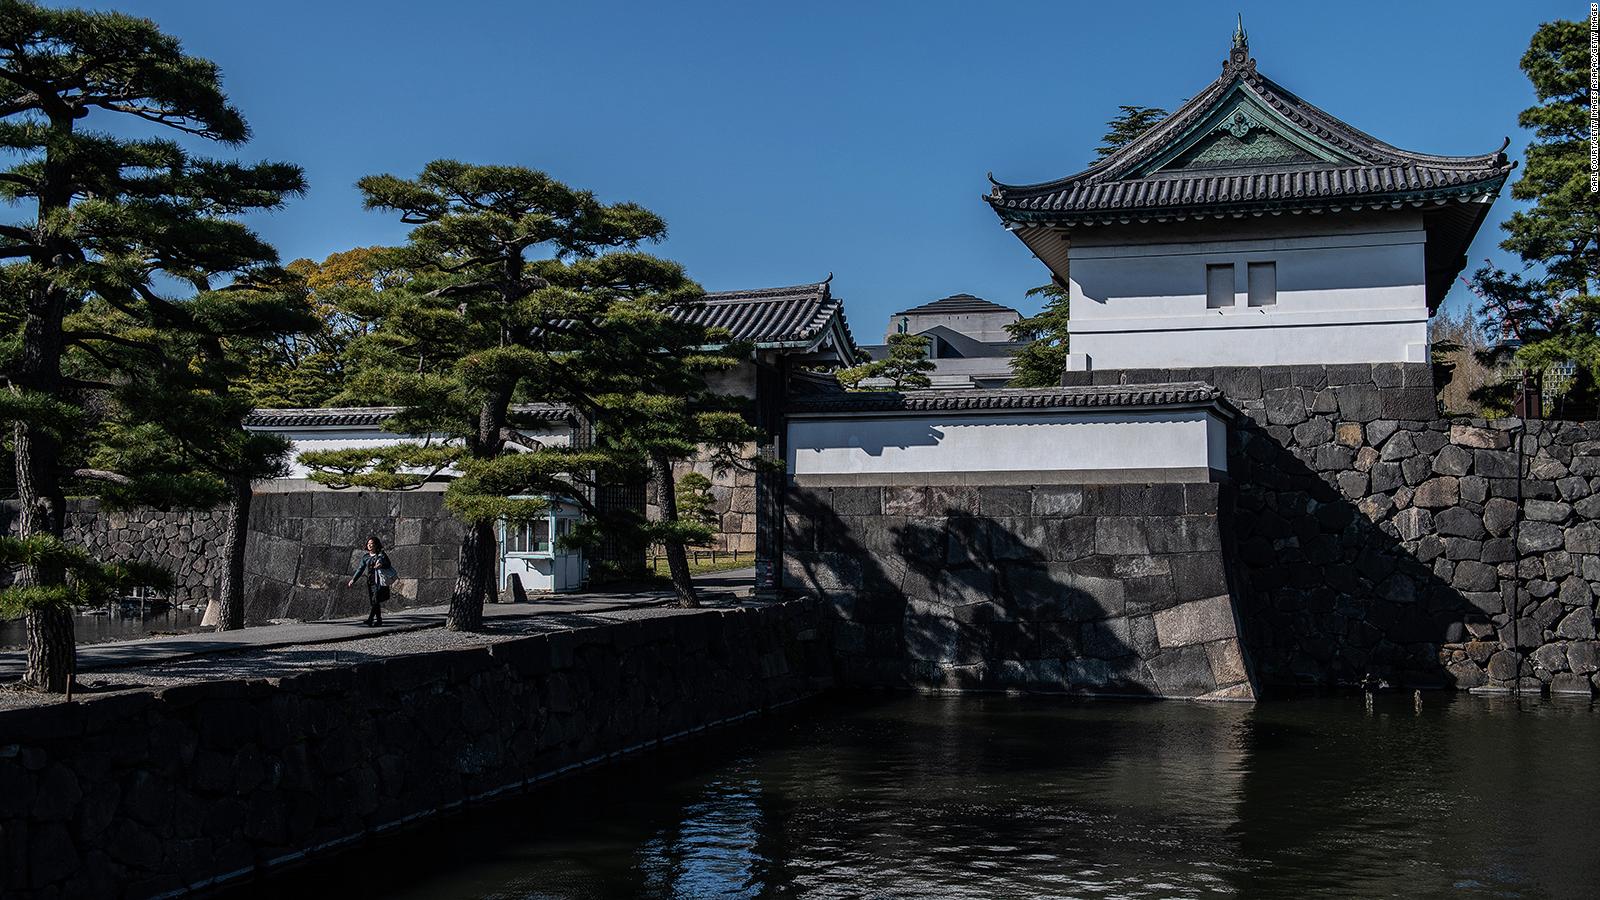 Tokyo S Imperial Palace Your Guide To Visiting Japan S Royal Residence Cnn Travel